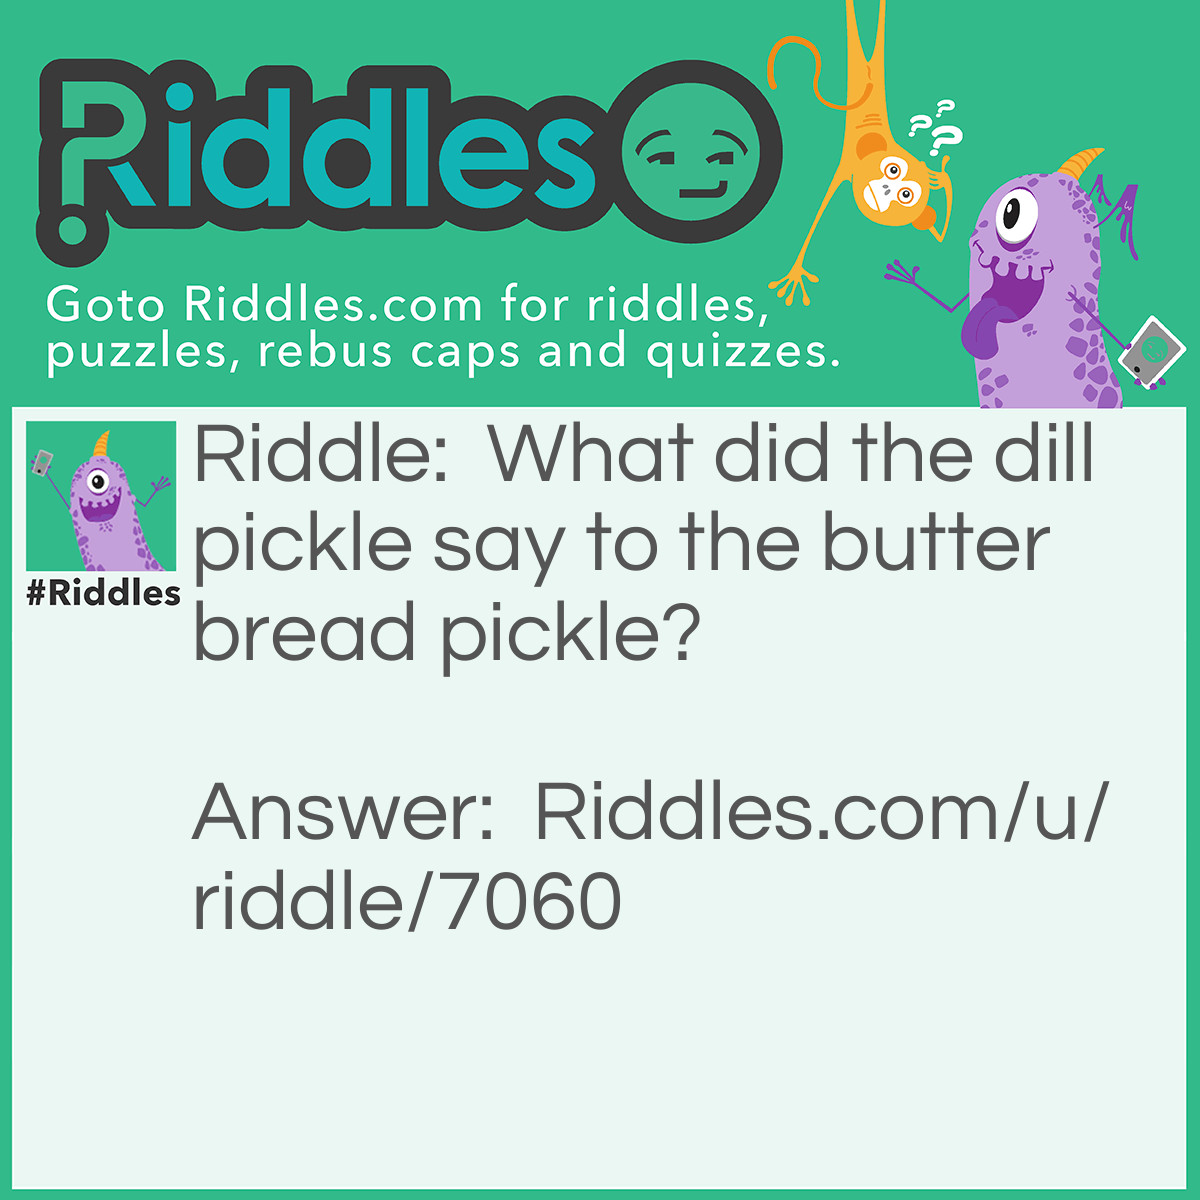 Riddle: What did the dill pickle say to the butter bread pickle? Answer: Would you tickle my pickle?